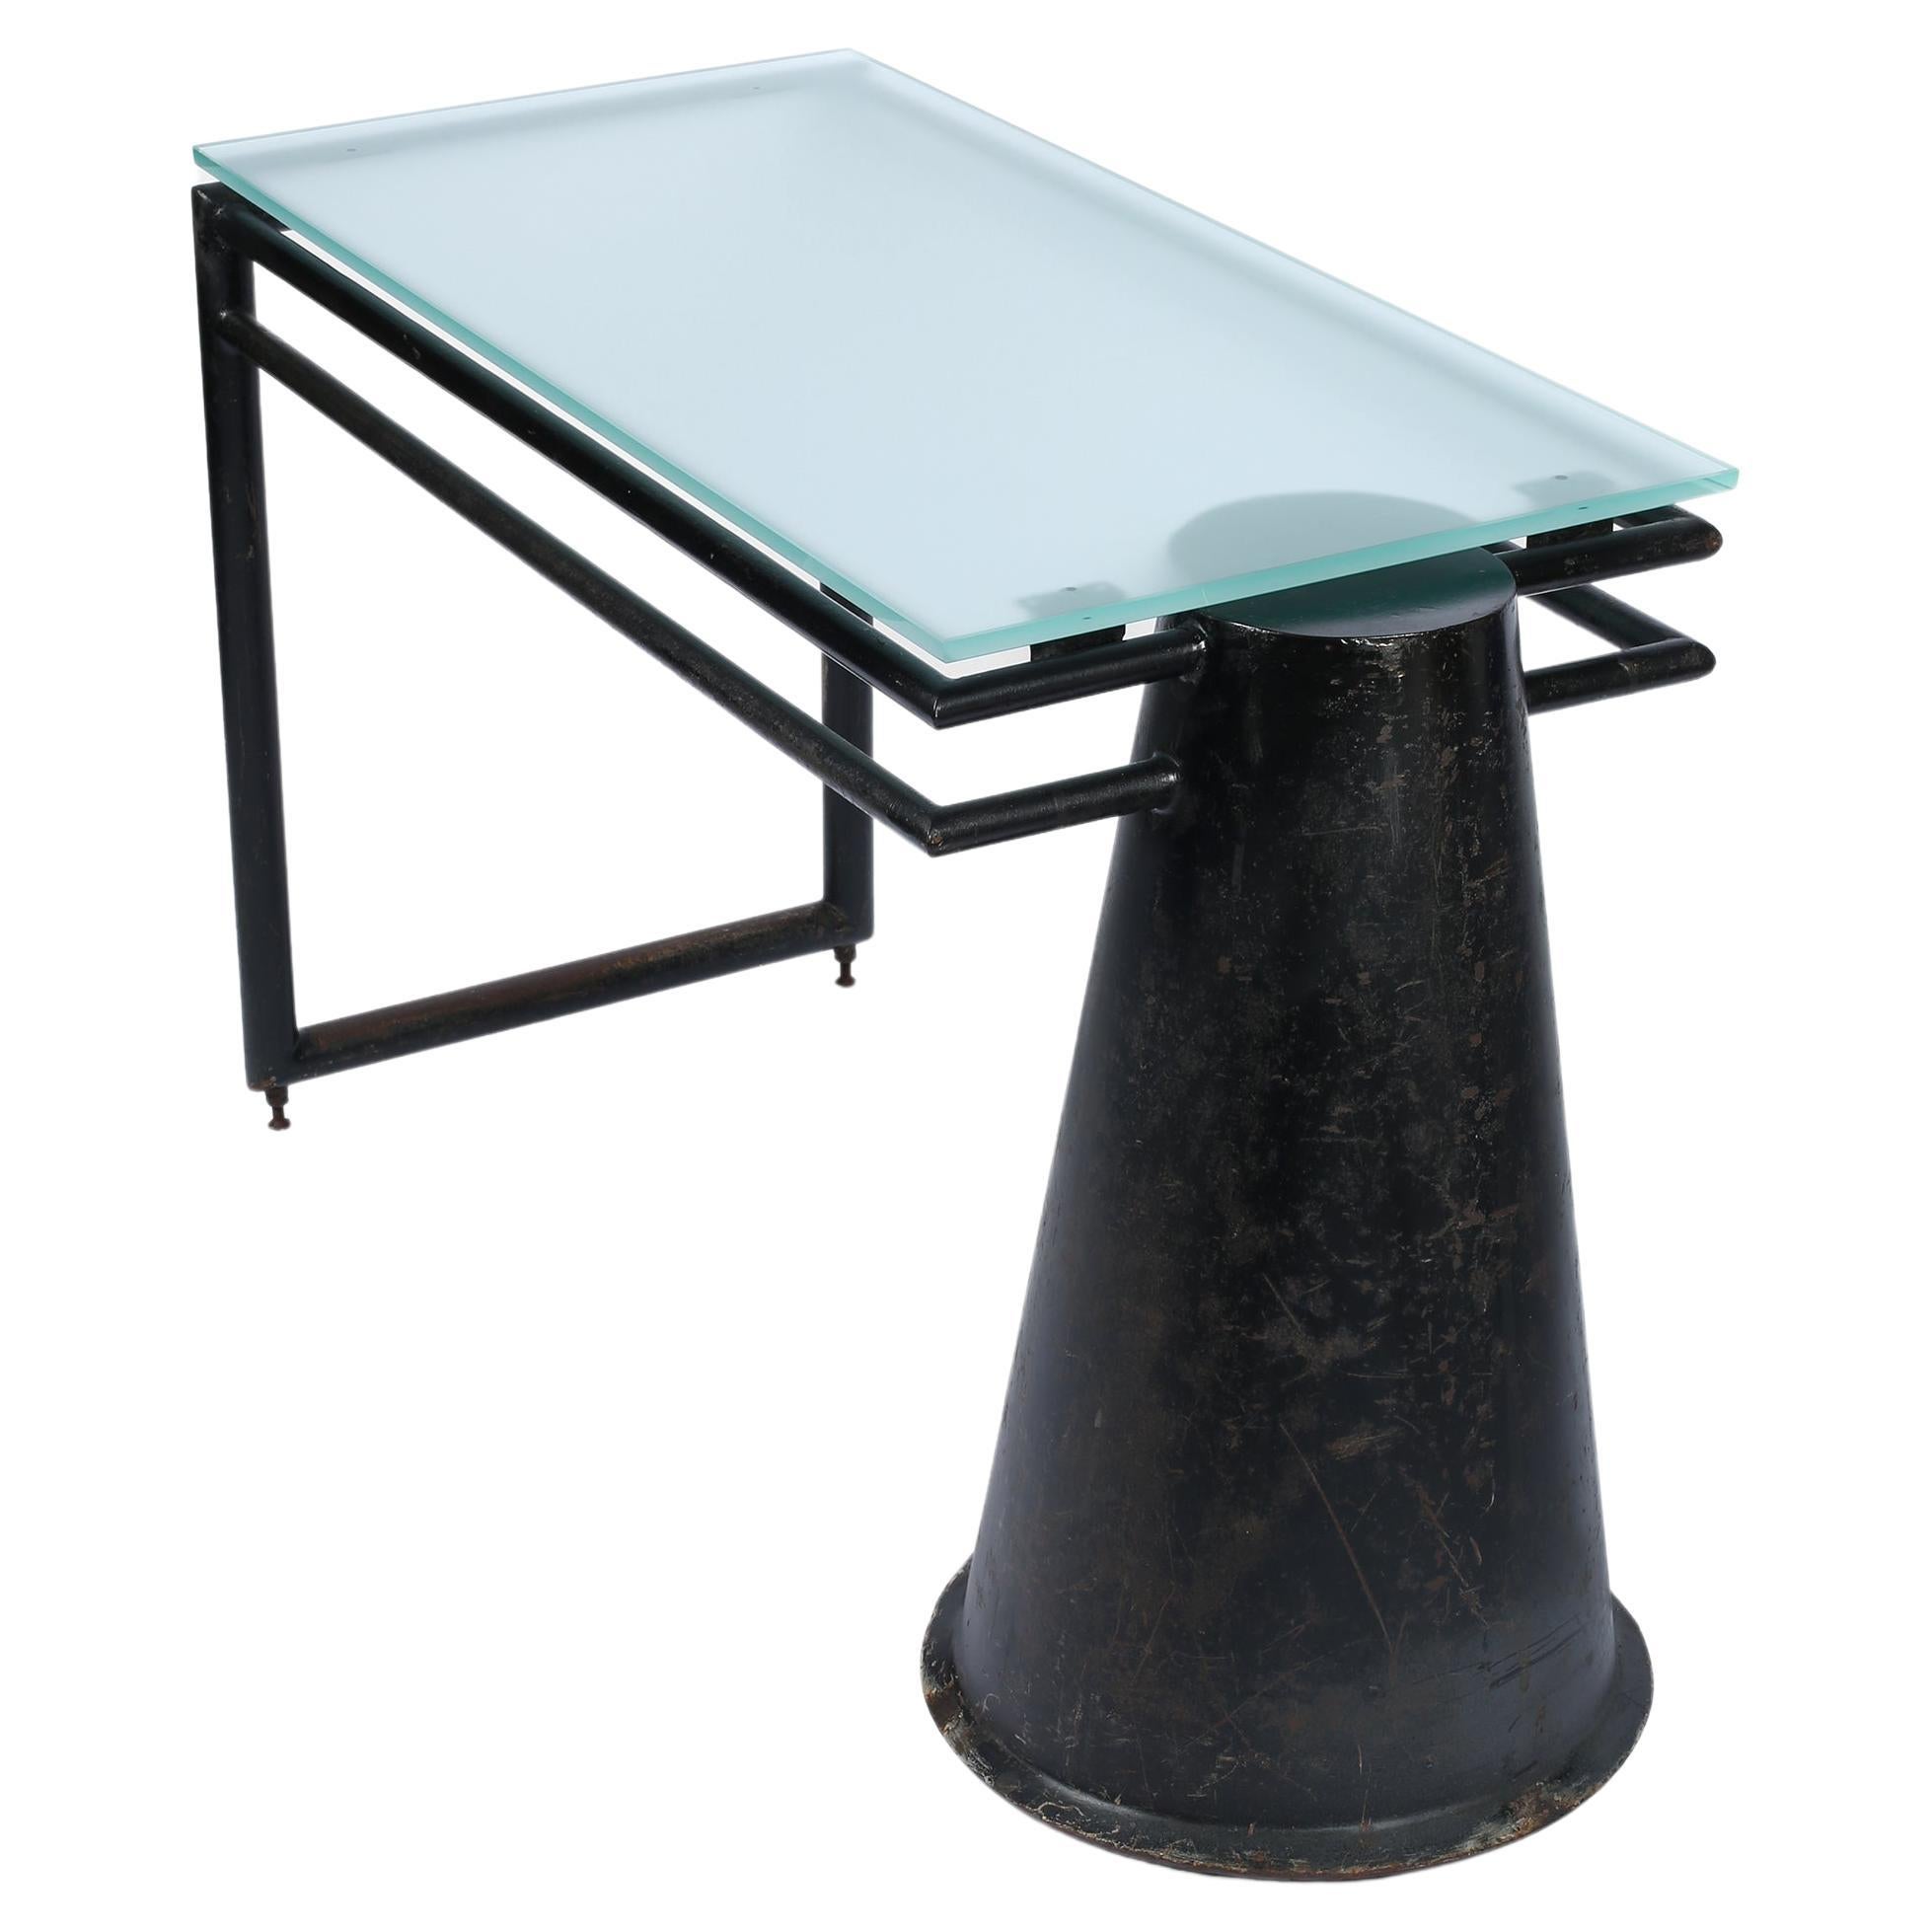 Modernist Steel and Glass Desk, French Early-Mid 20th Century For Sale